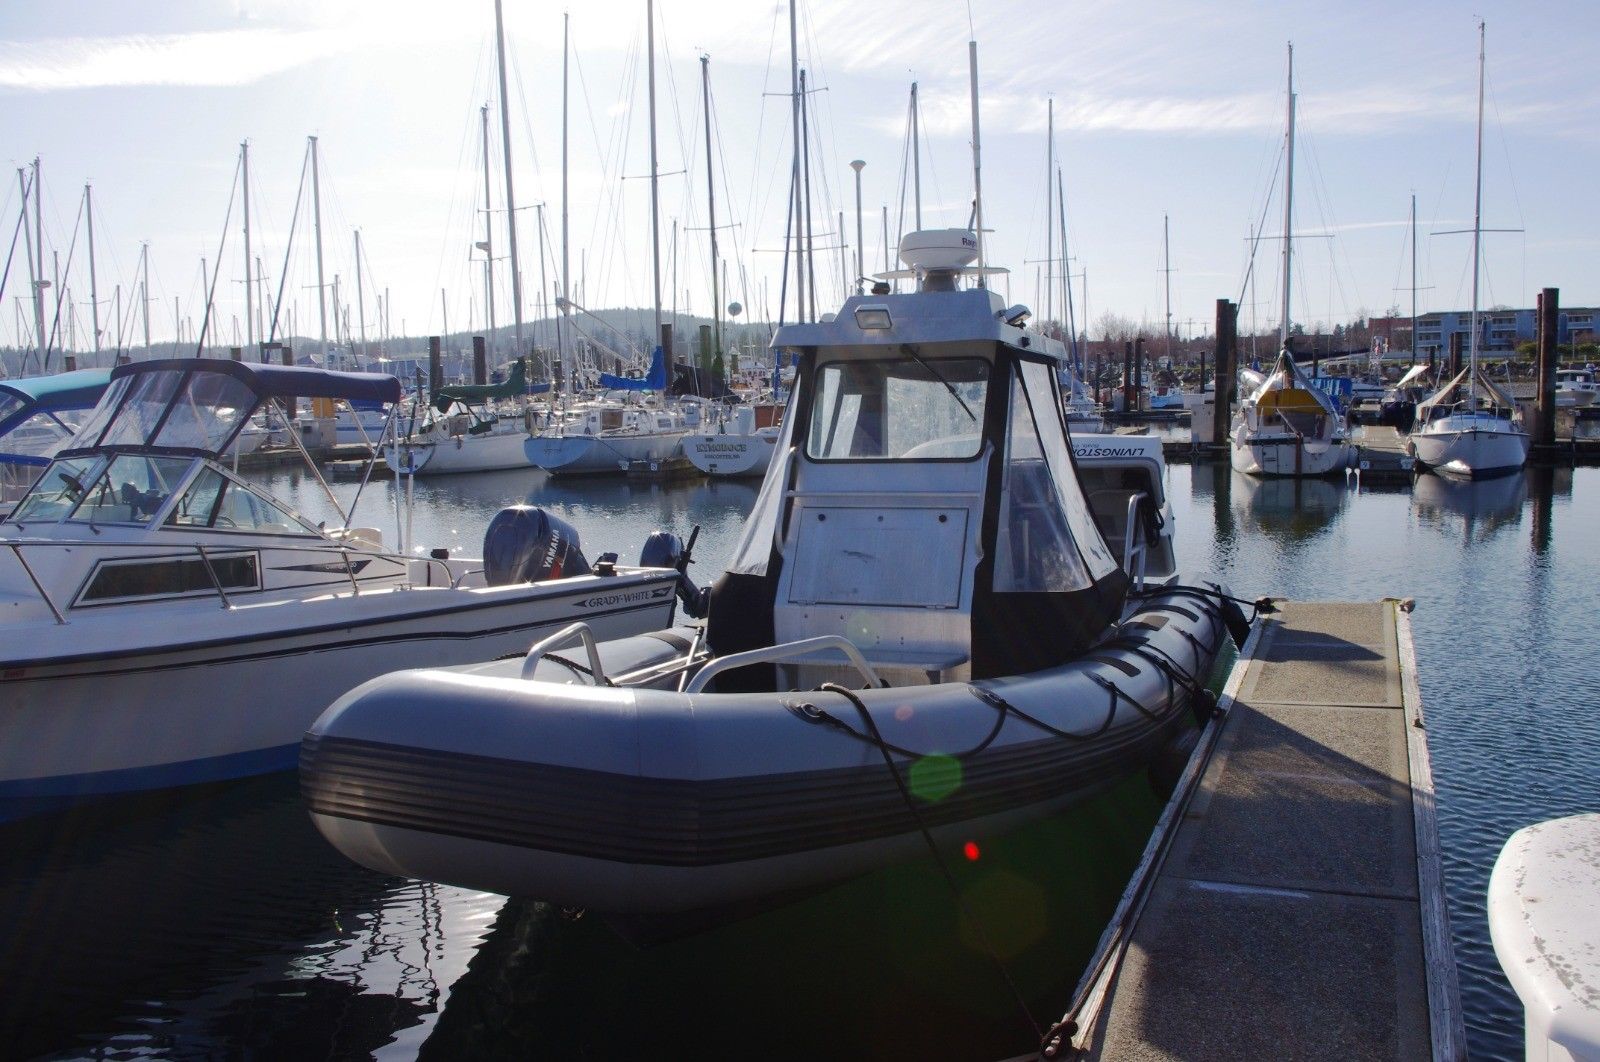 inboard outboard boats for sale